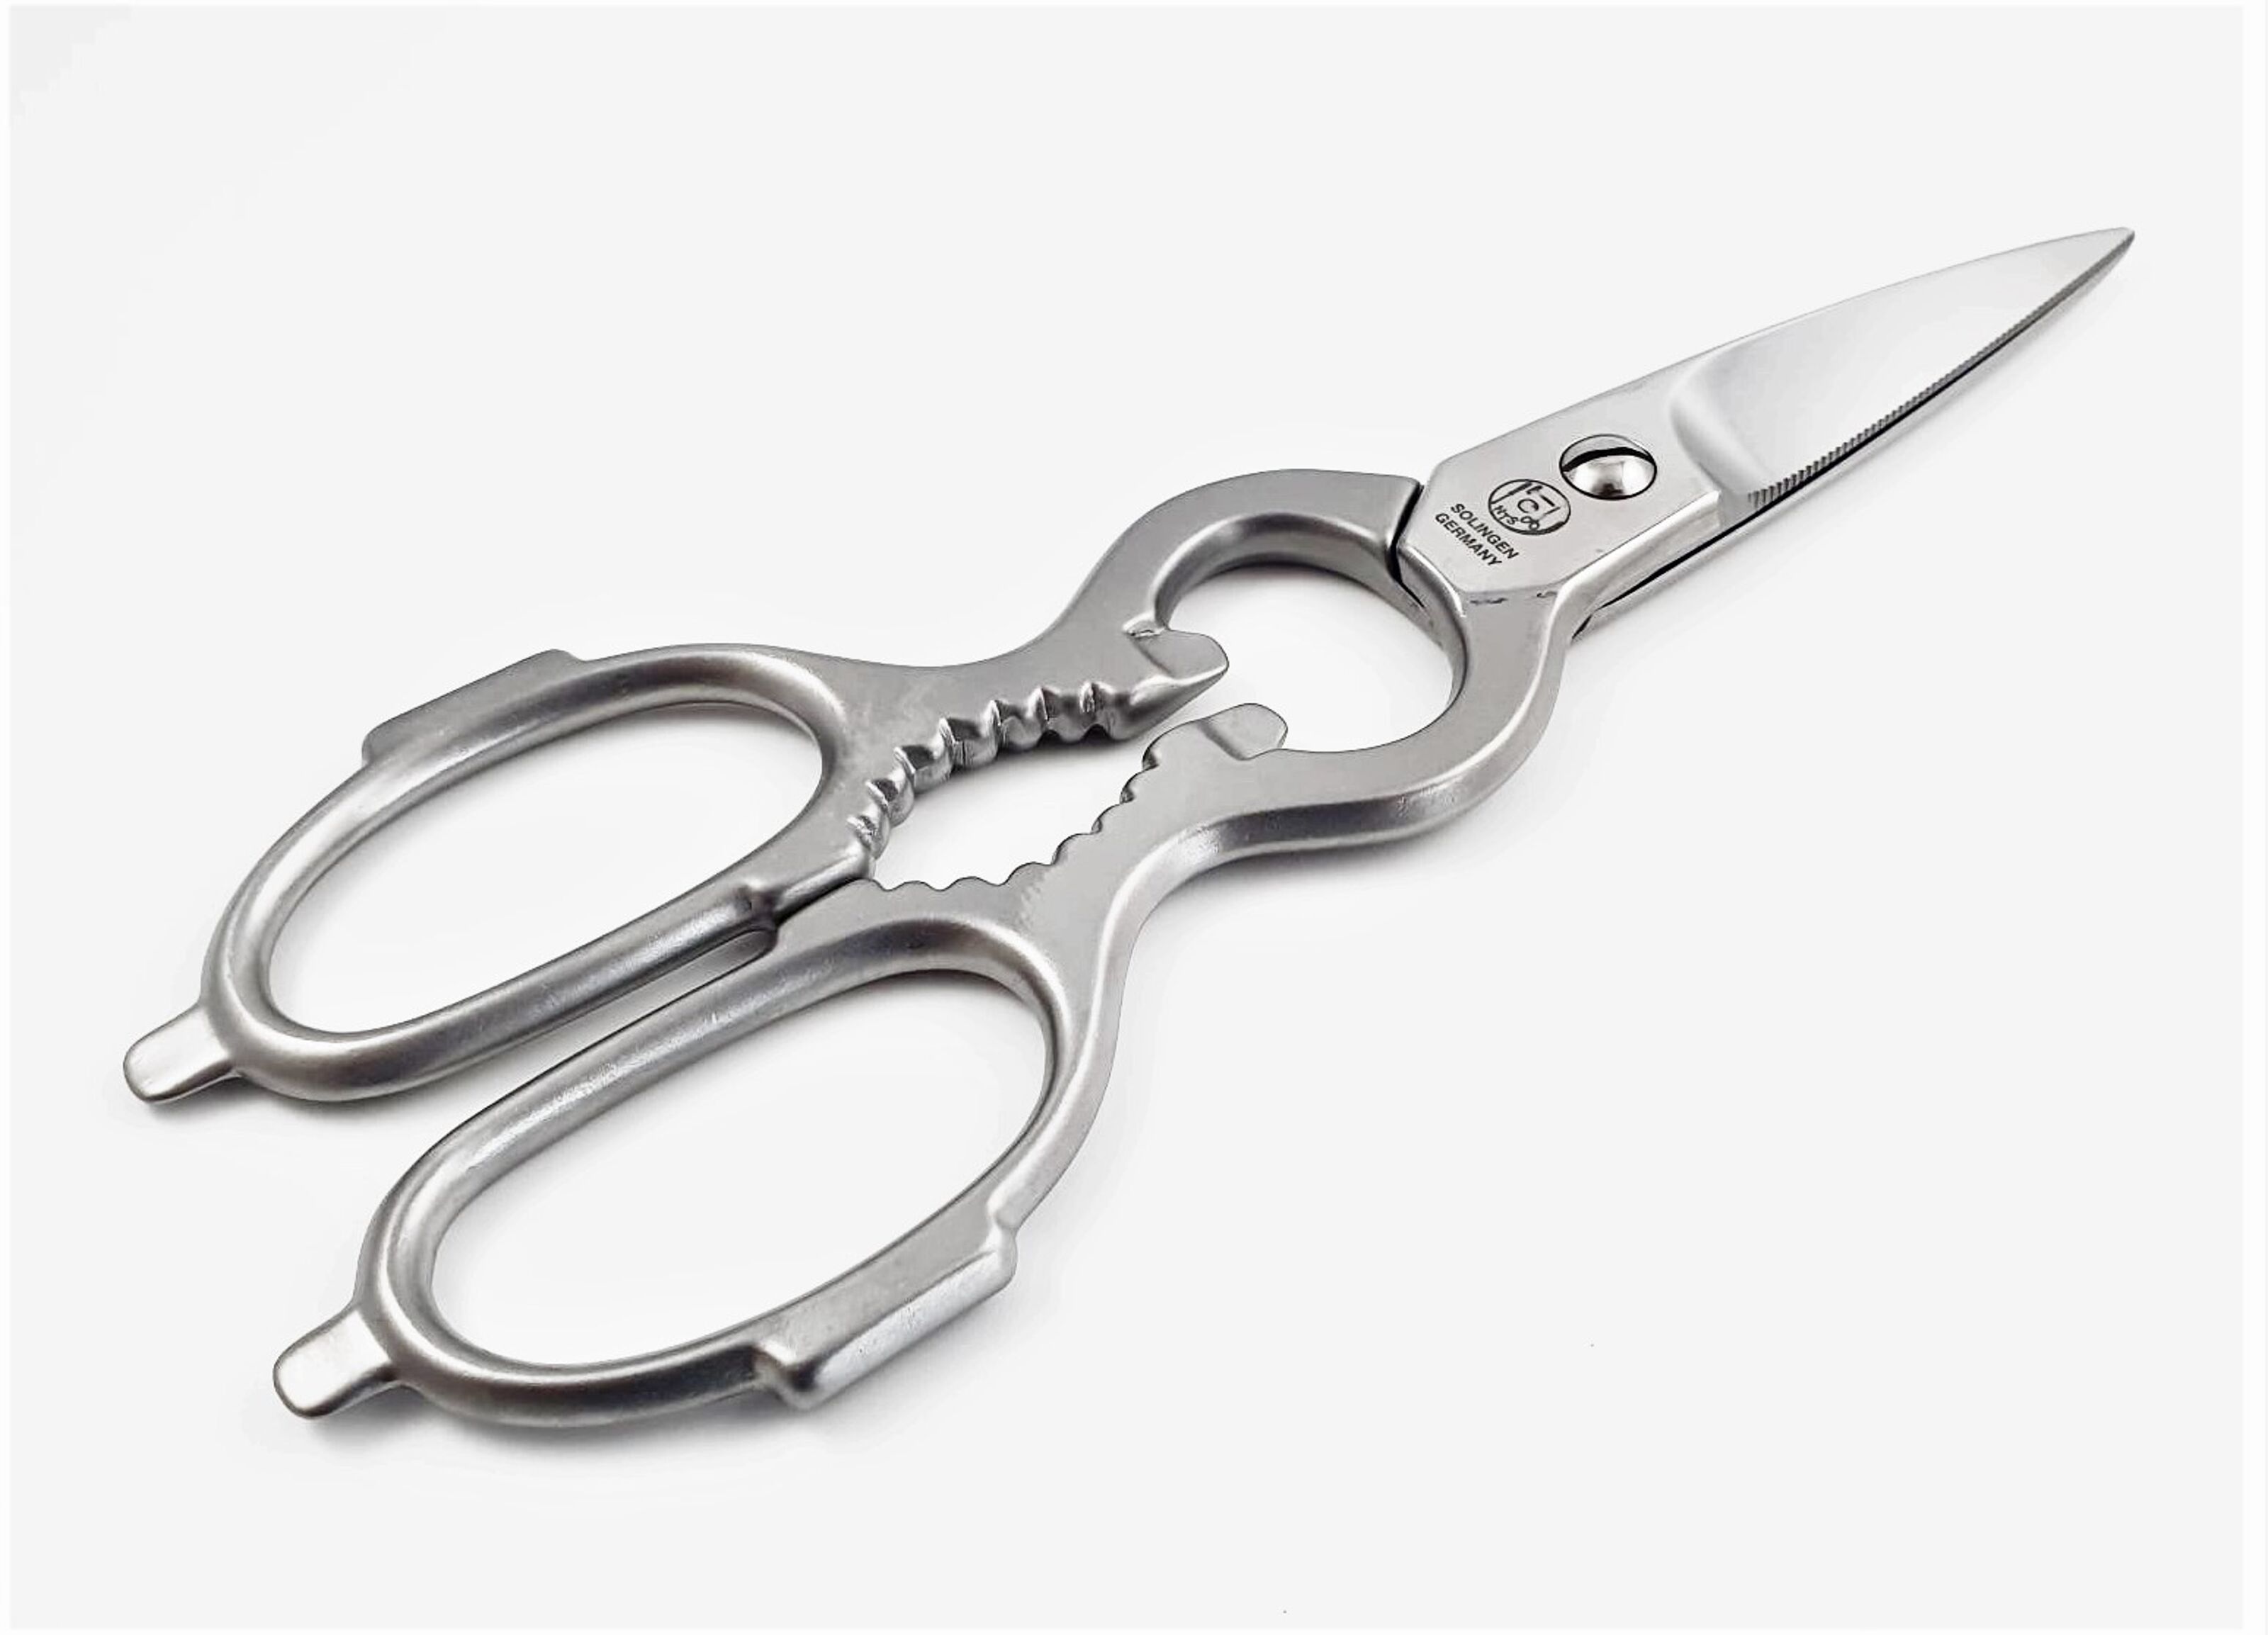 Wholesale fish cutter scissors for Precision and Safety in the Kitchen 